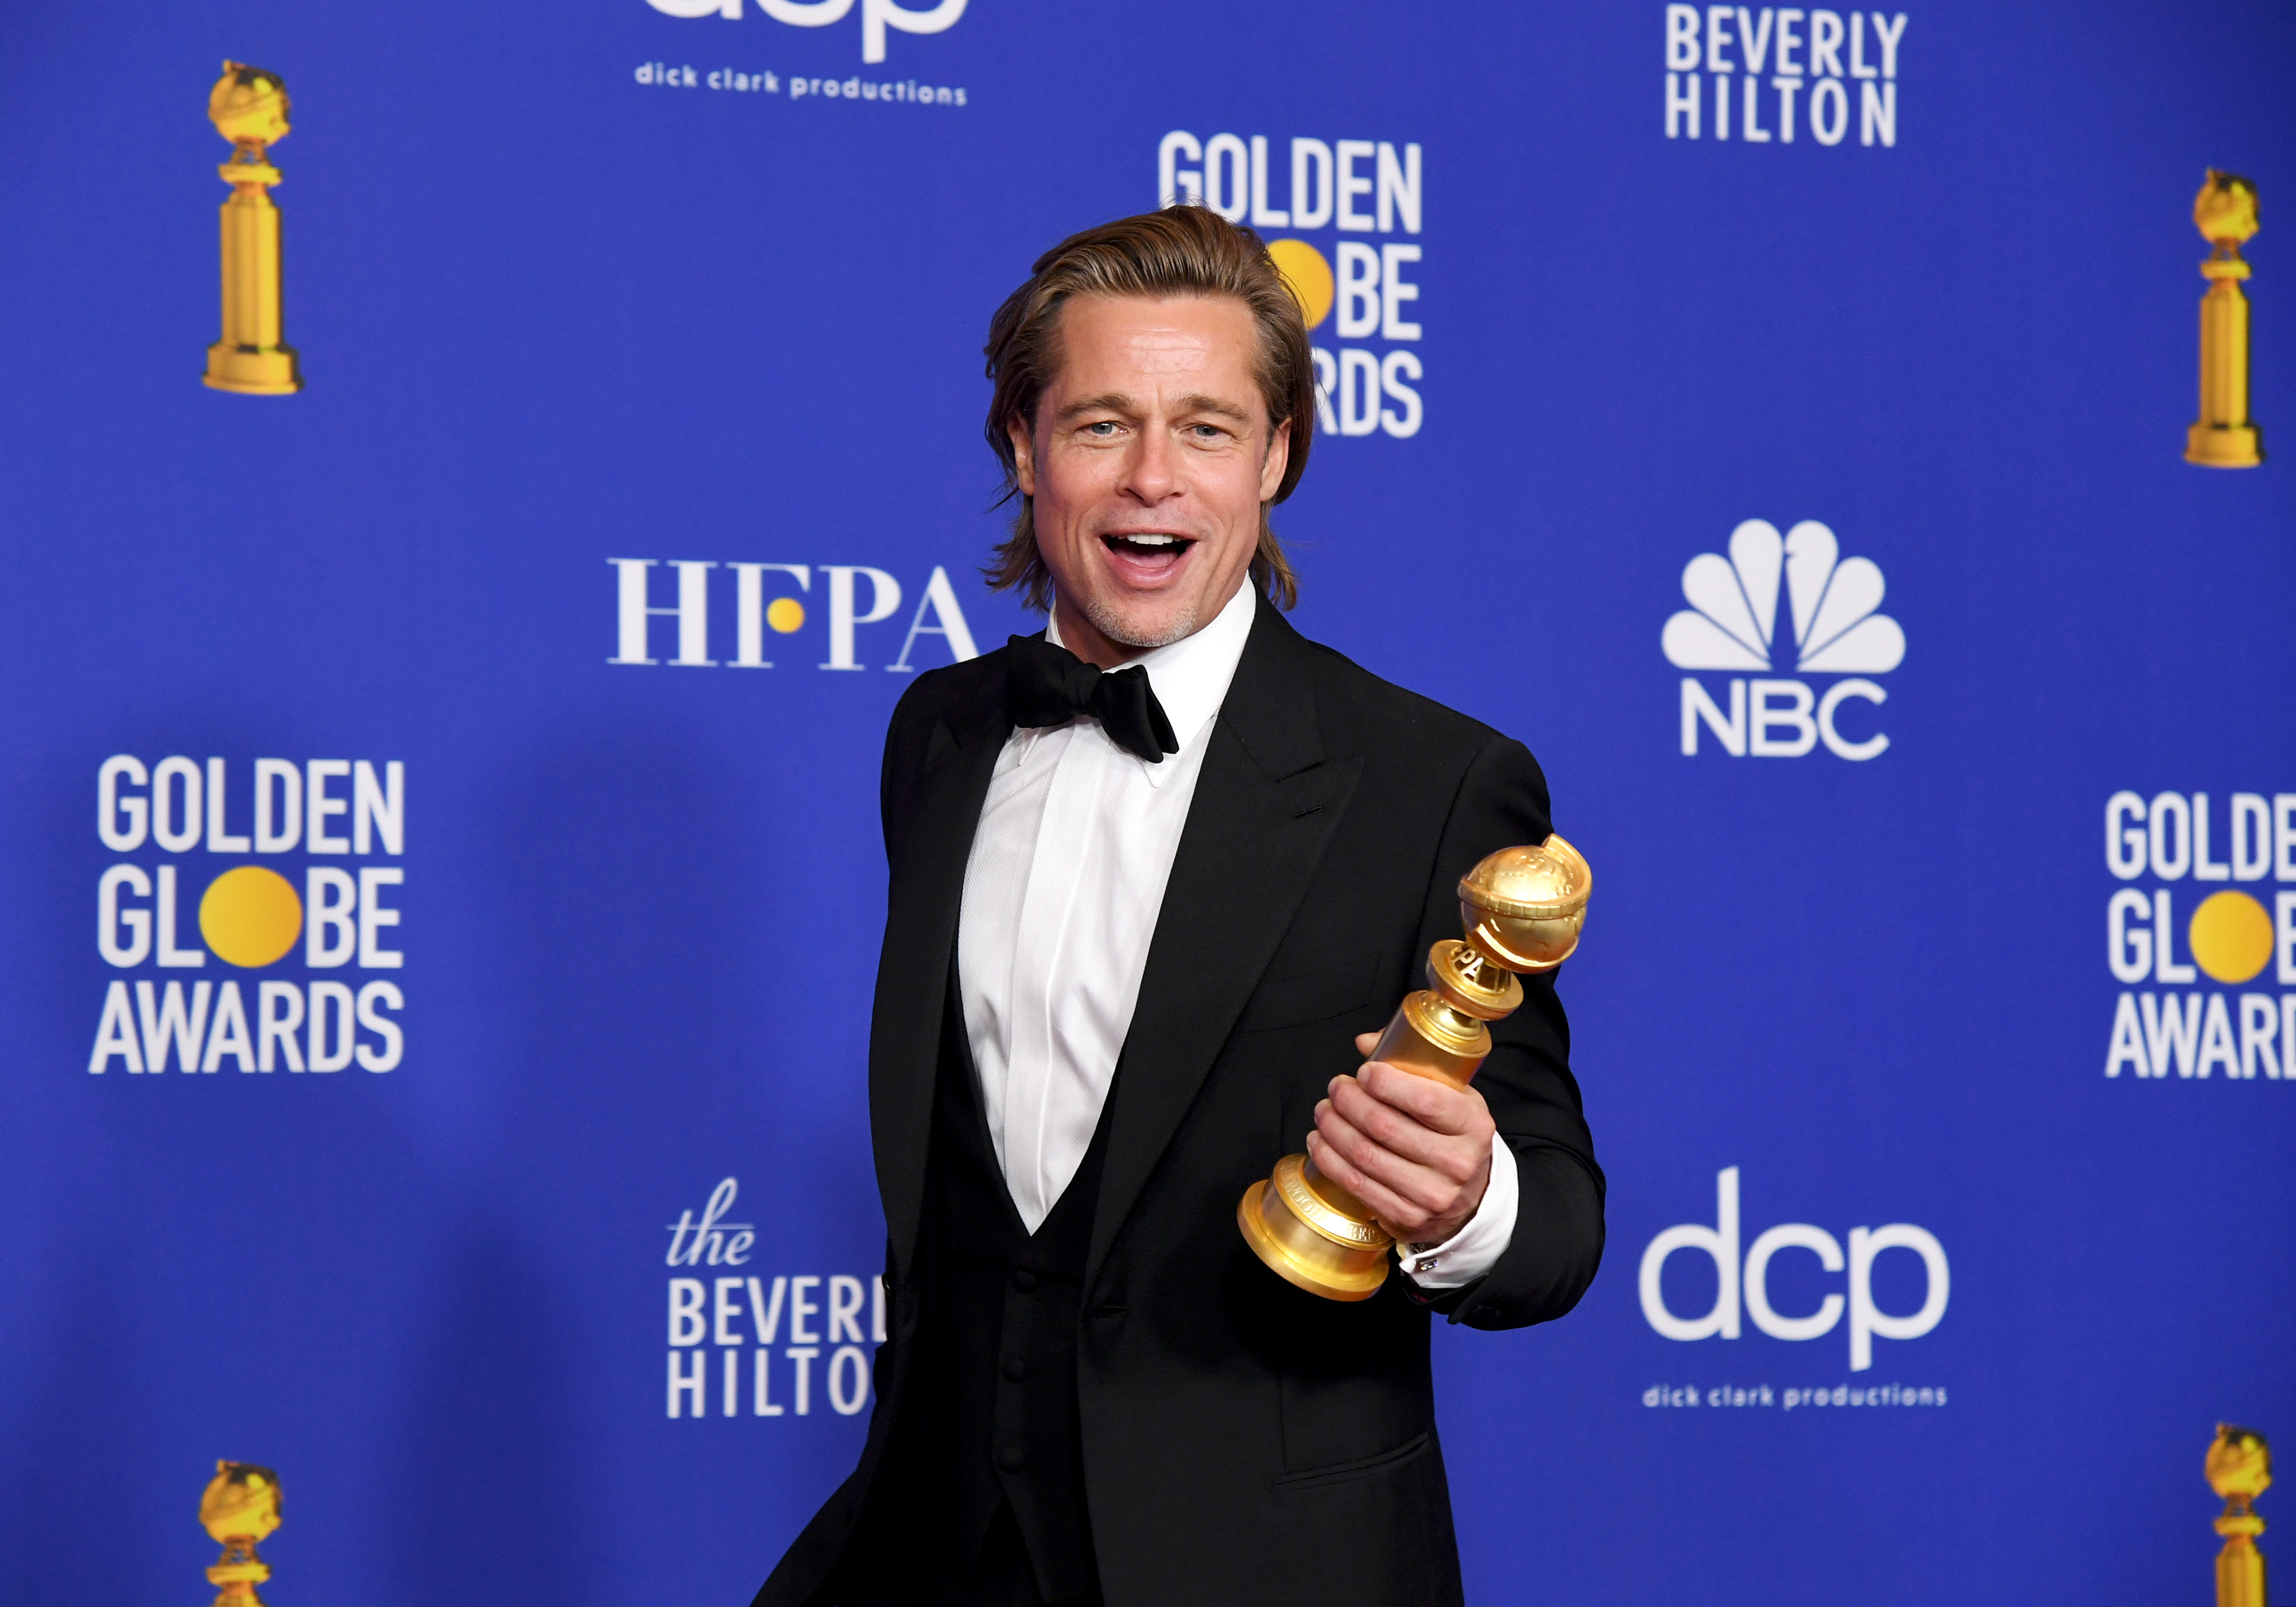 Brad Pitt, winner of Best Performance by a Supporting Actor in a Motion Picture, poses in the press room during the 77th Annual Golden Globe Awards at The Beverly Hilton Hotel on January 05, 2020 in Beverly Hills, California. (Photo by Kevin Winter/Getty Images)